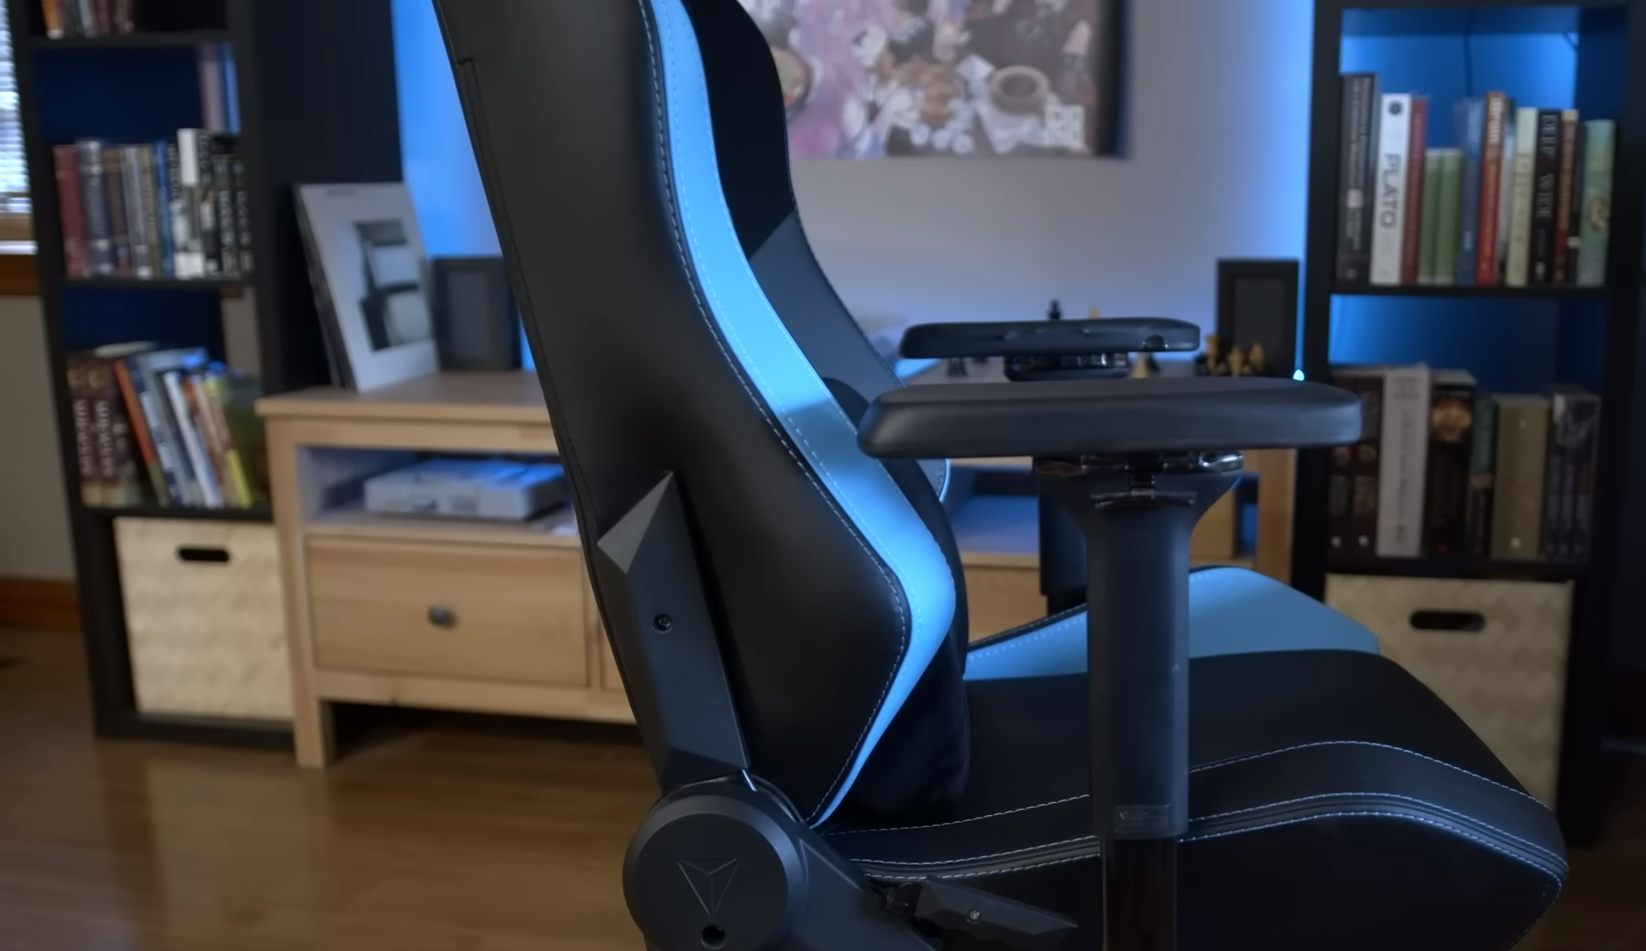 Are Gaming Chairs Good For Gaming And Work?